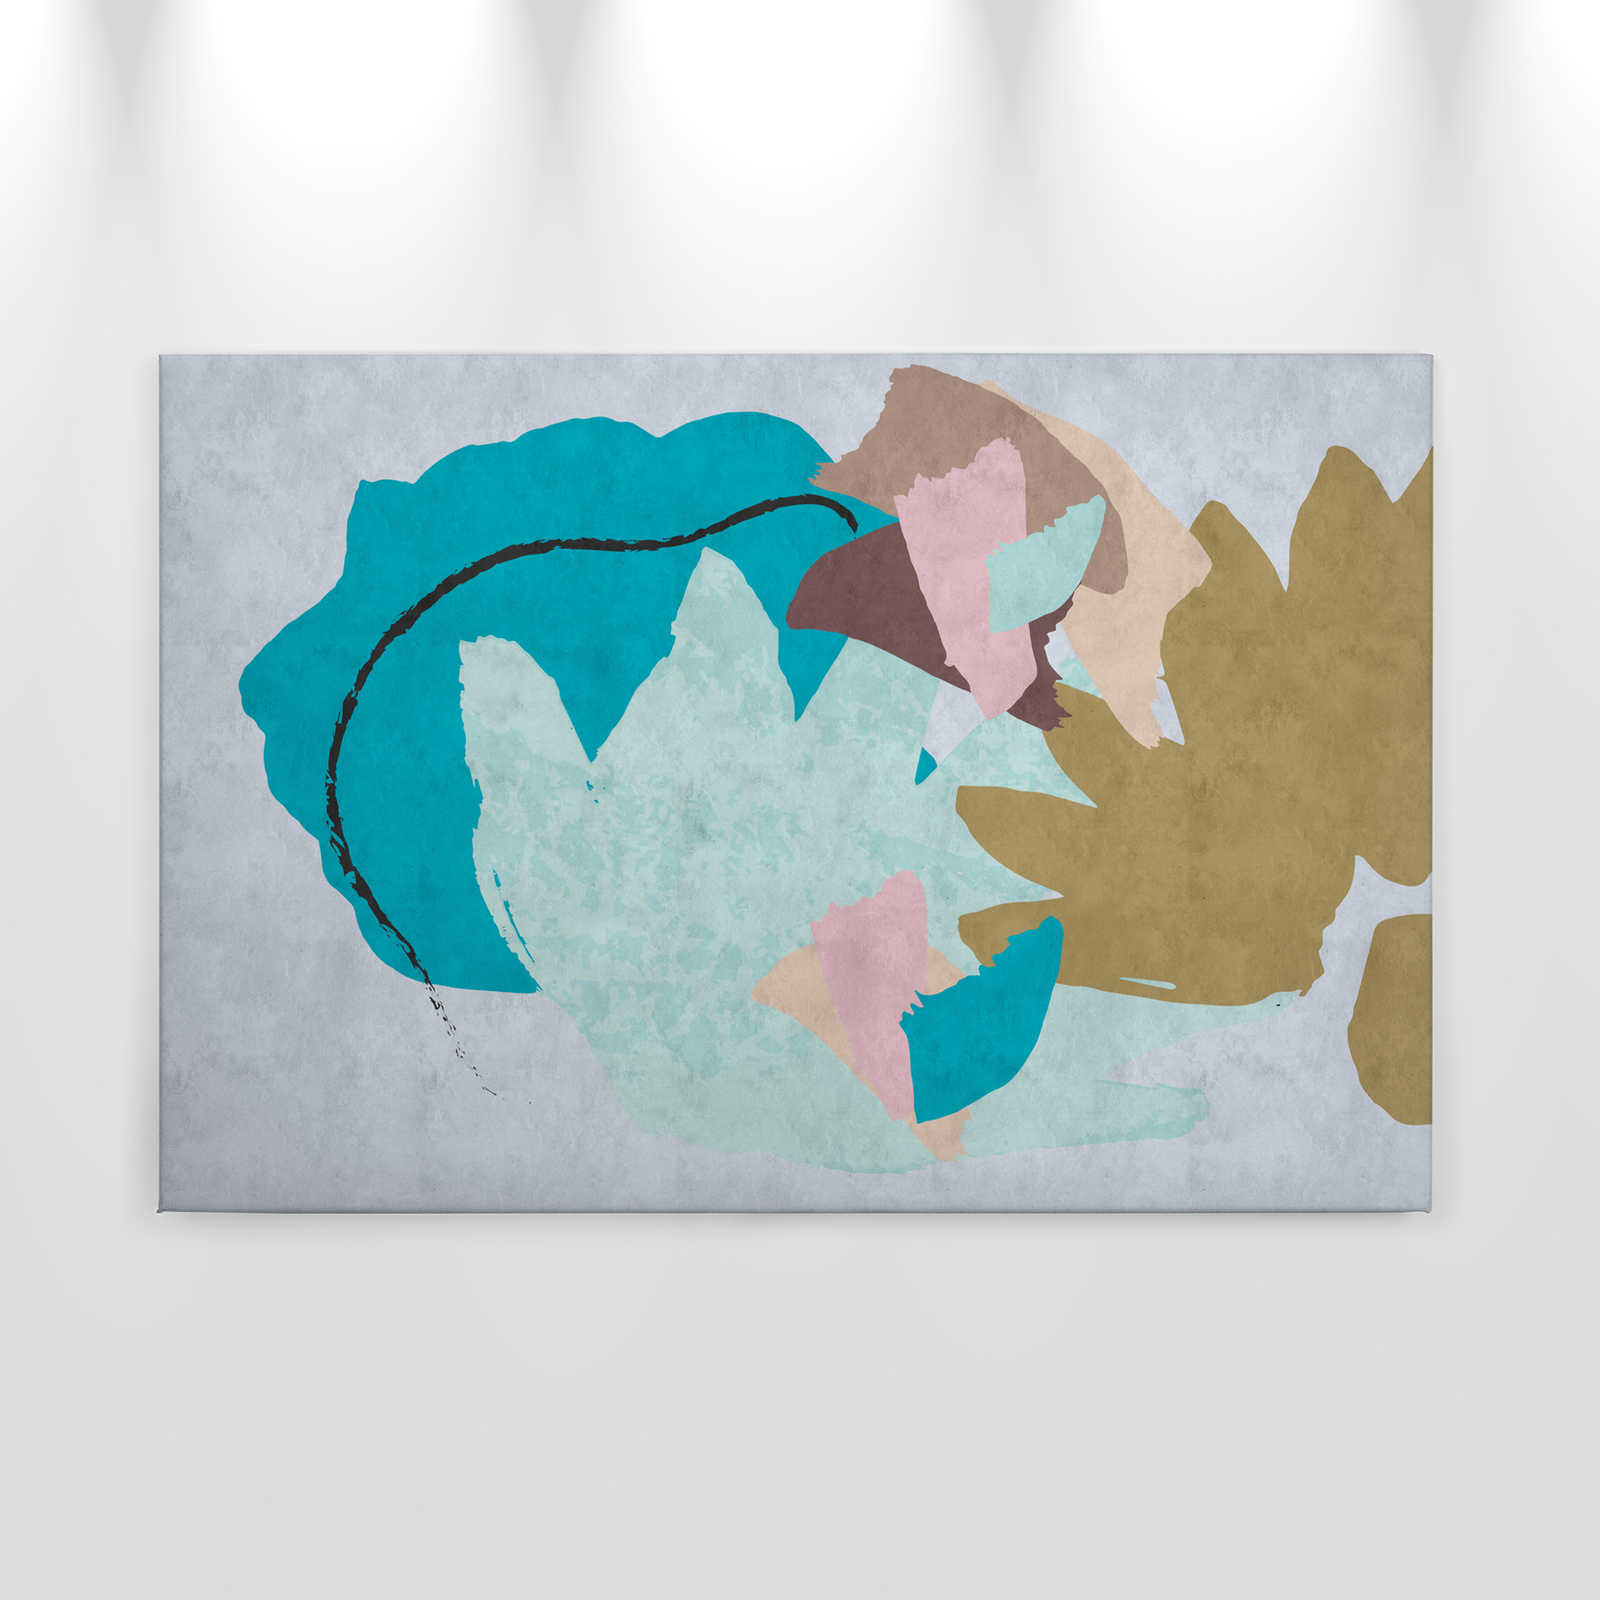             Floral Collage 1 - Abstract Canvas Painting, Colourful Art- Blotting Paper Texture - 0.90 m x 0.60 m
        